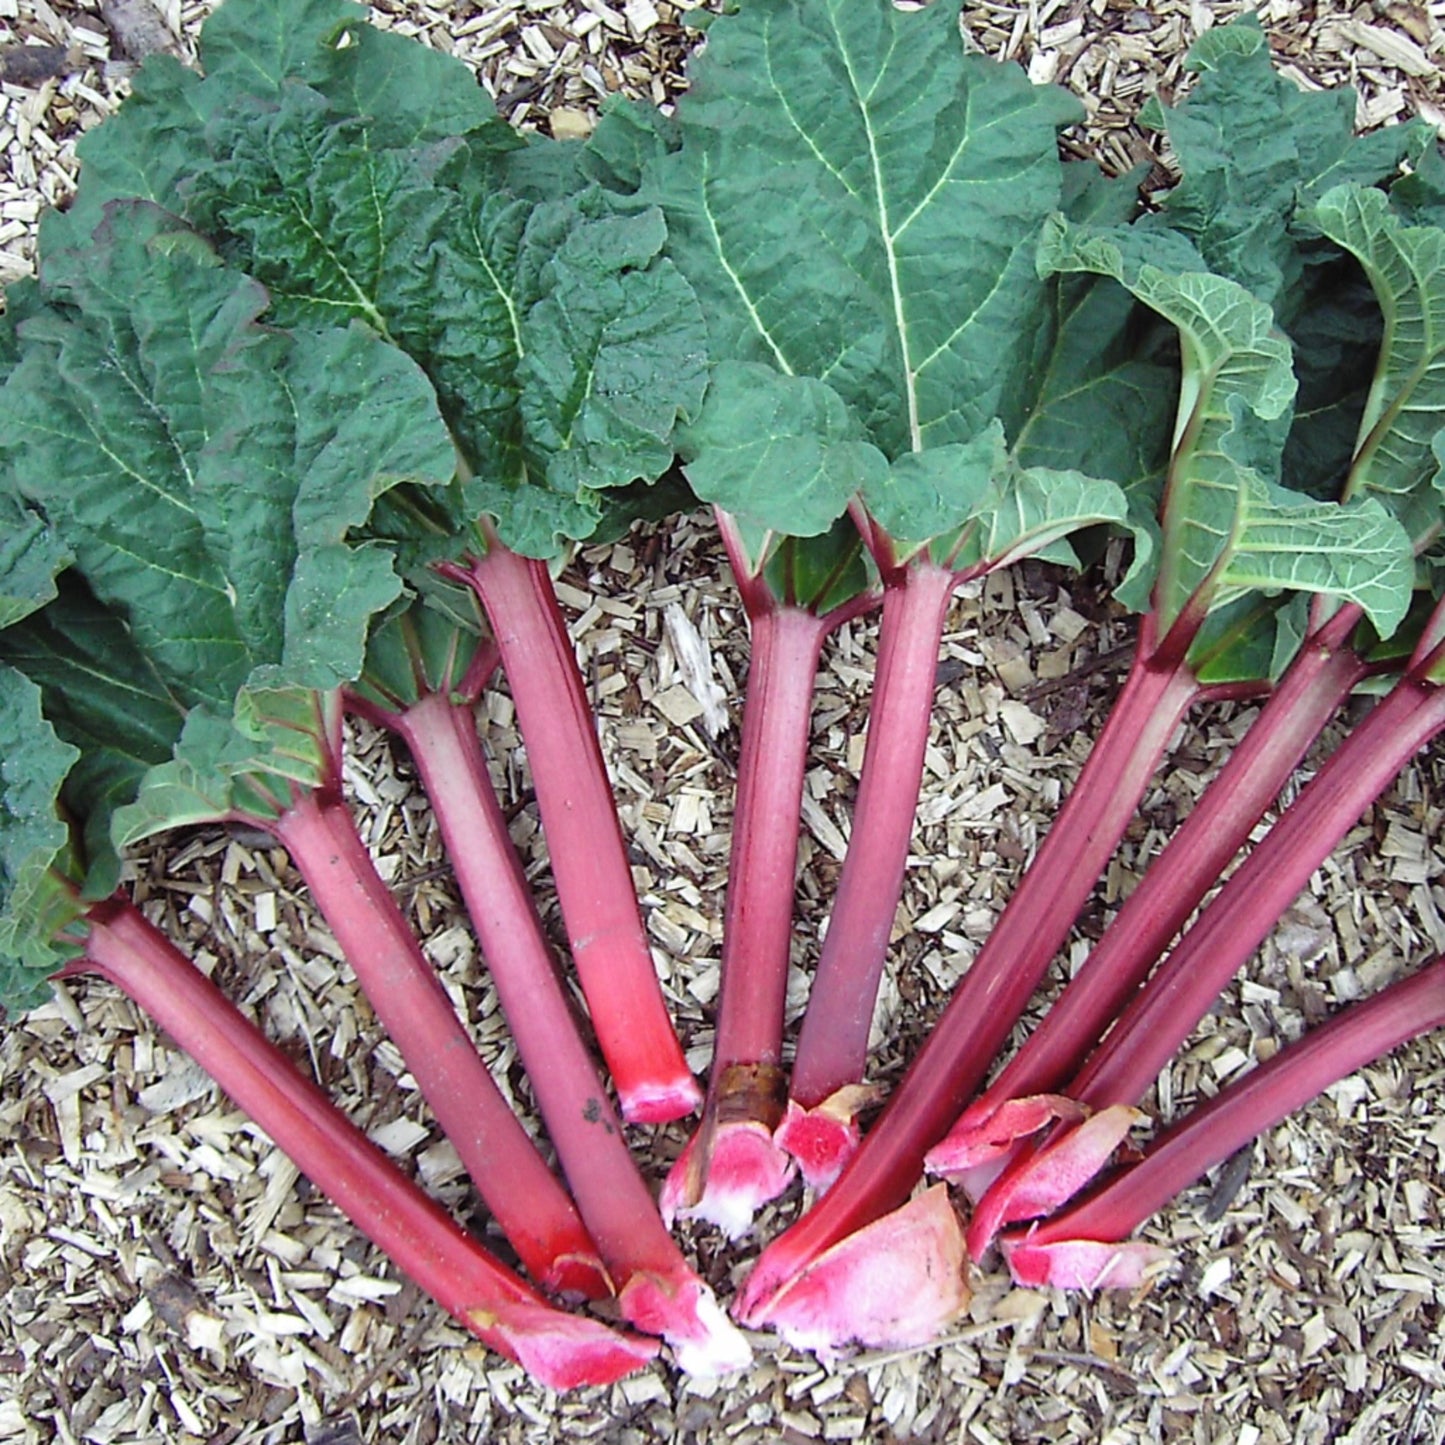 4 Siberian Rhubarb Extract 20:1 - Four Ingredients